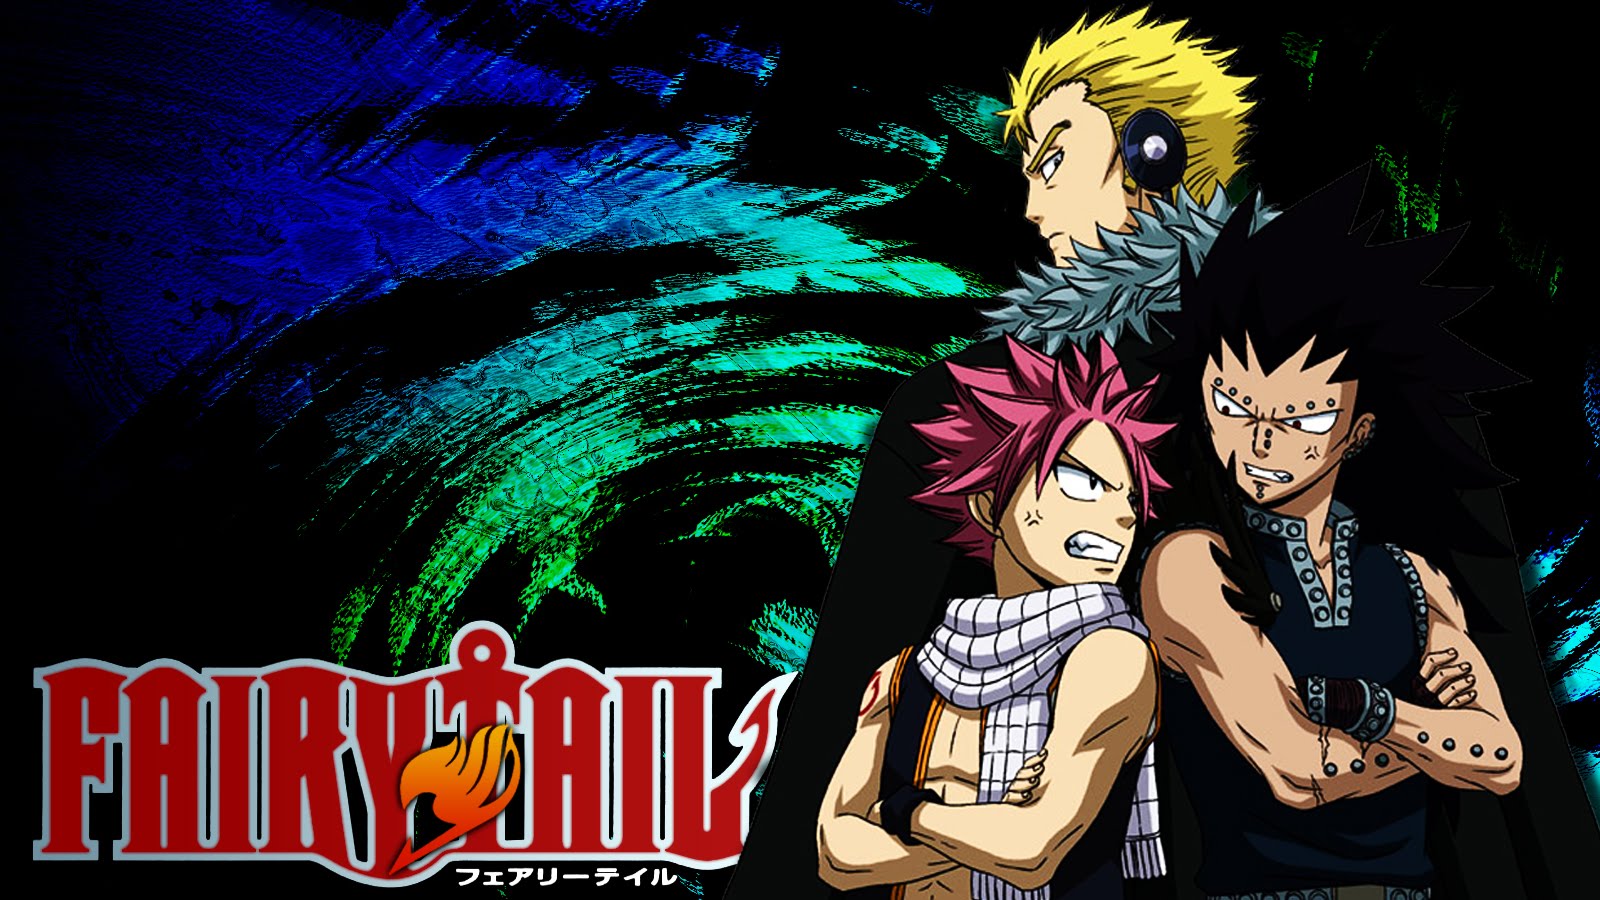  Fairy Tail Wallpapers Fairy Tail Fairy Tail fairy tail wallpapers